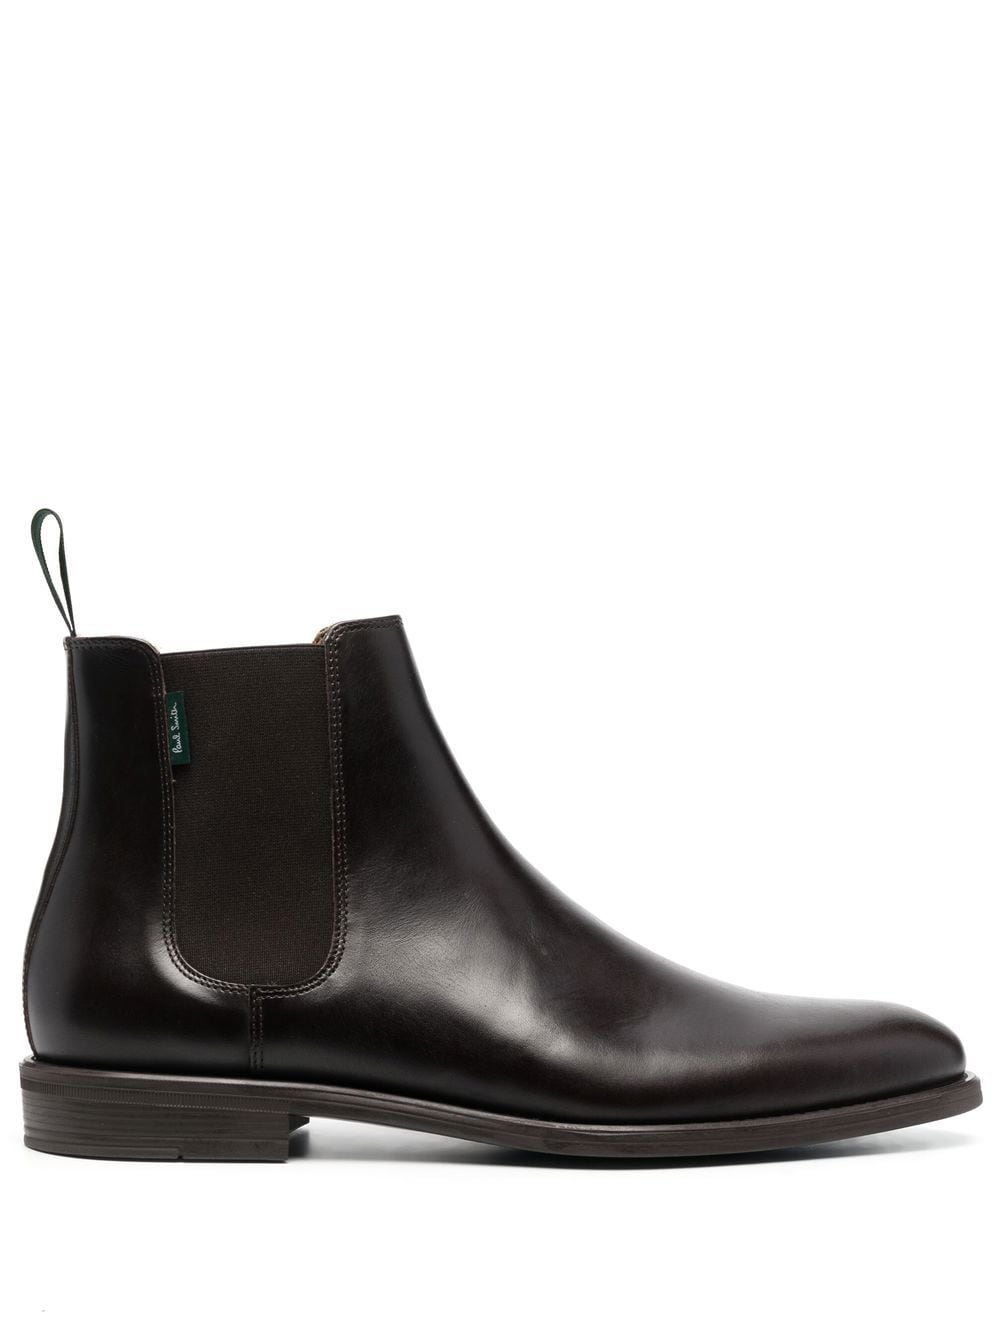 PS Paul Smith leather ankle boots - Brown von PS Paul Smith